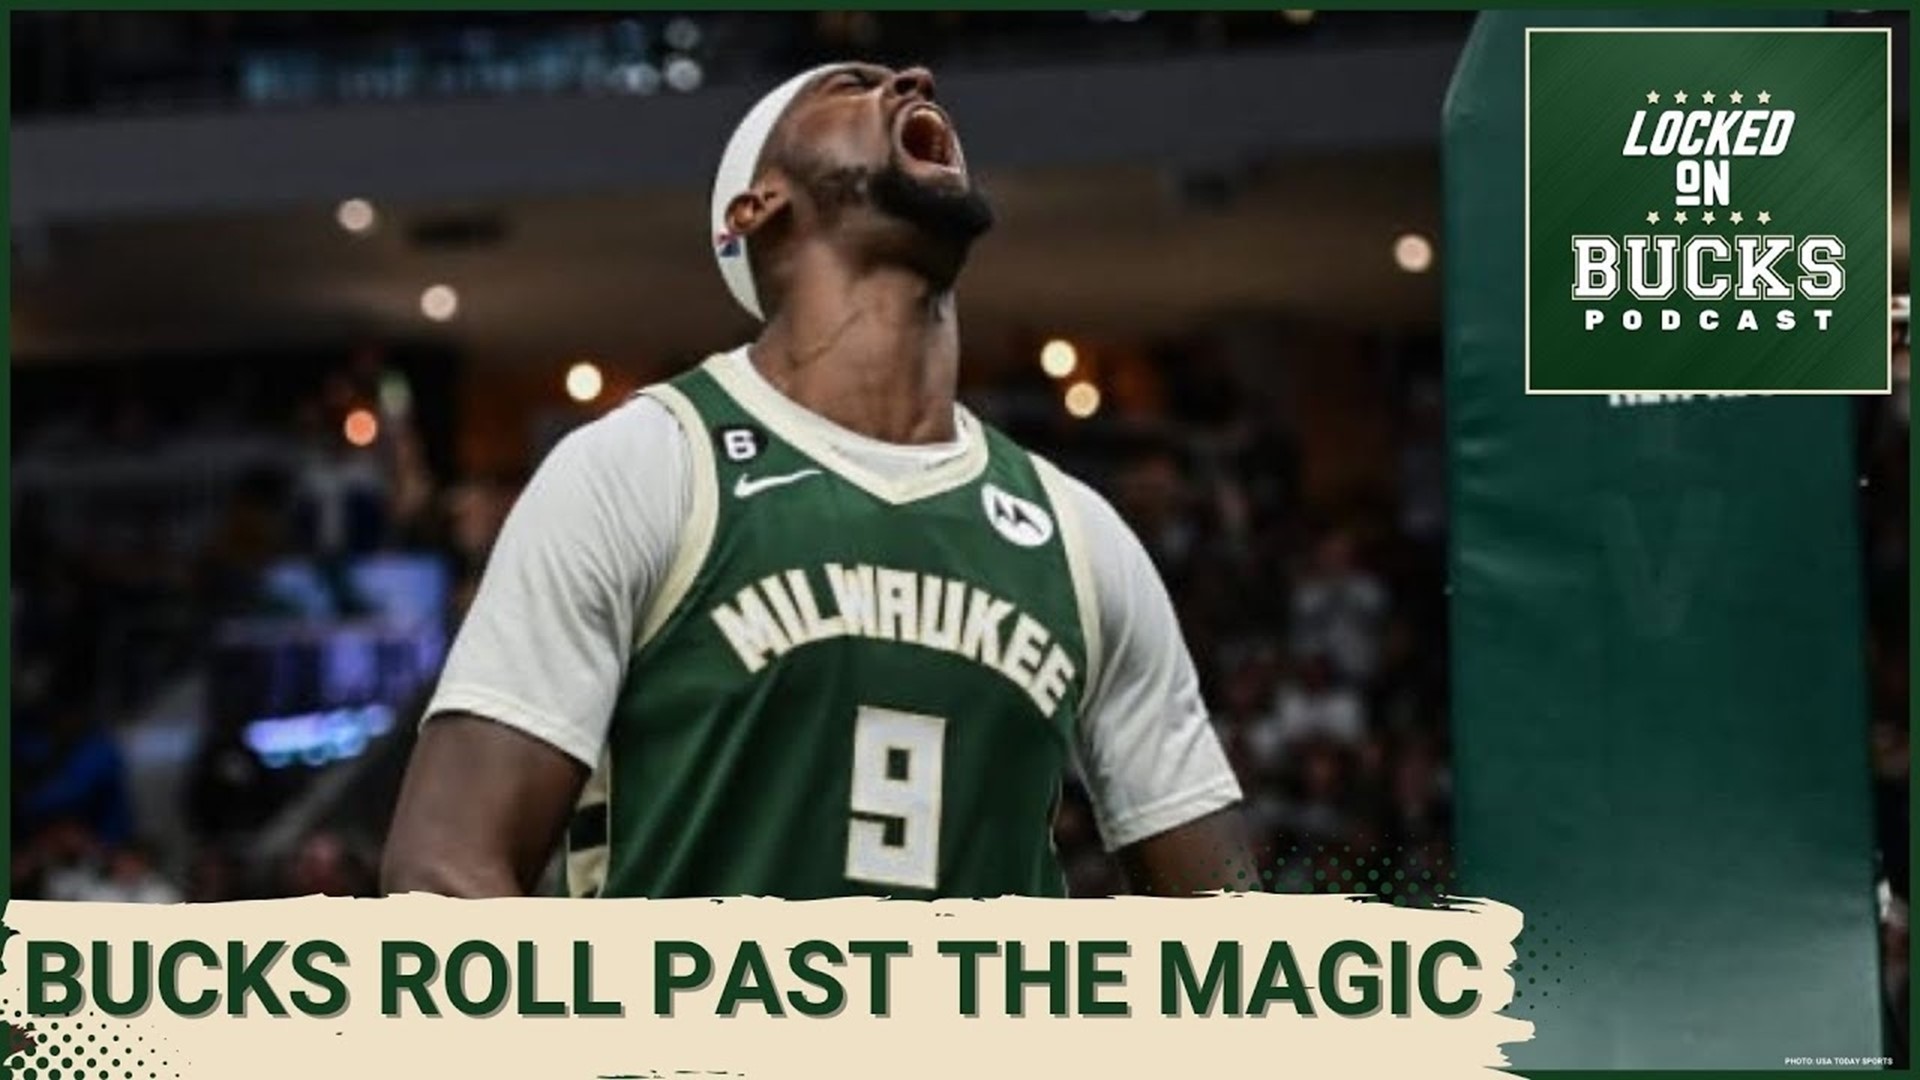 Back-to-back games result in back-to-back wins for the Milwaukee Bucks. Without Giannis Antetokounmpo and Khris Middleton, the Bucks defeated the Orlando Magic.